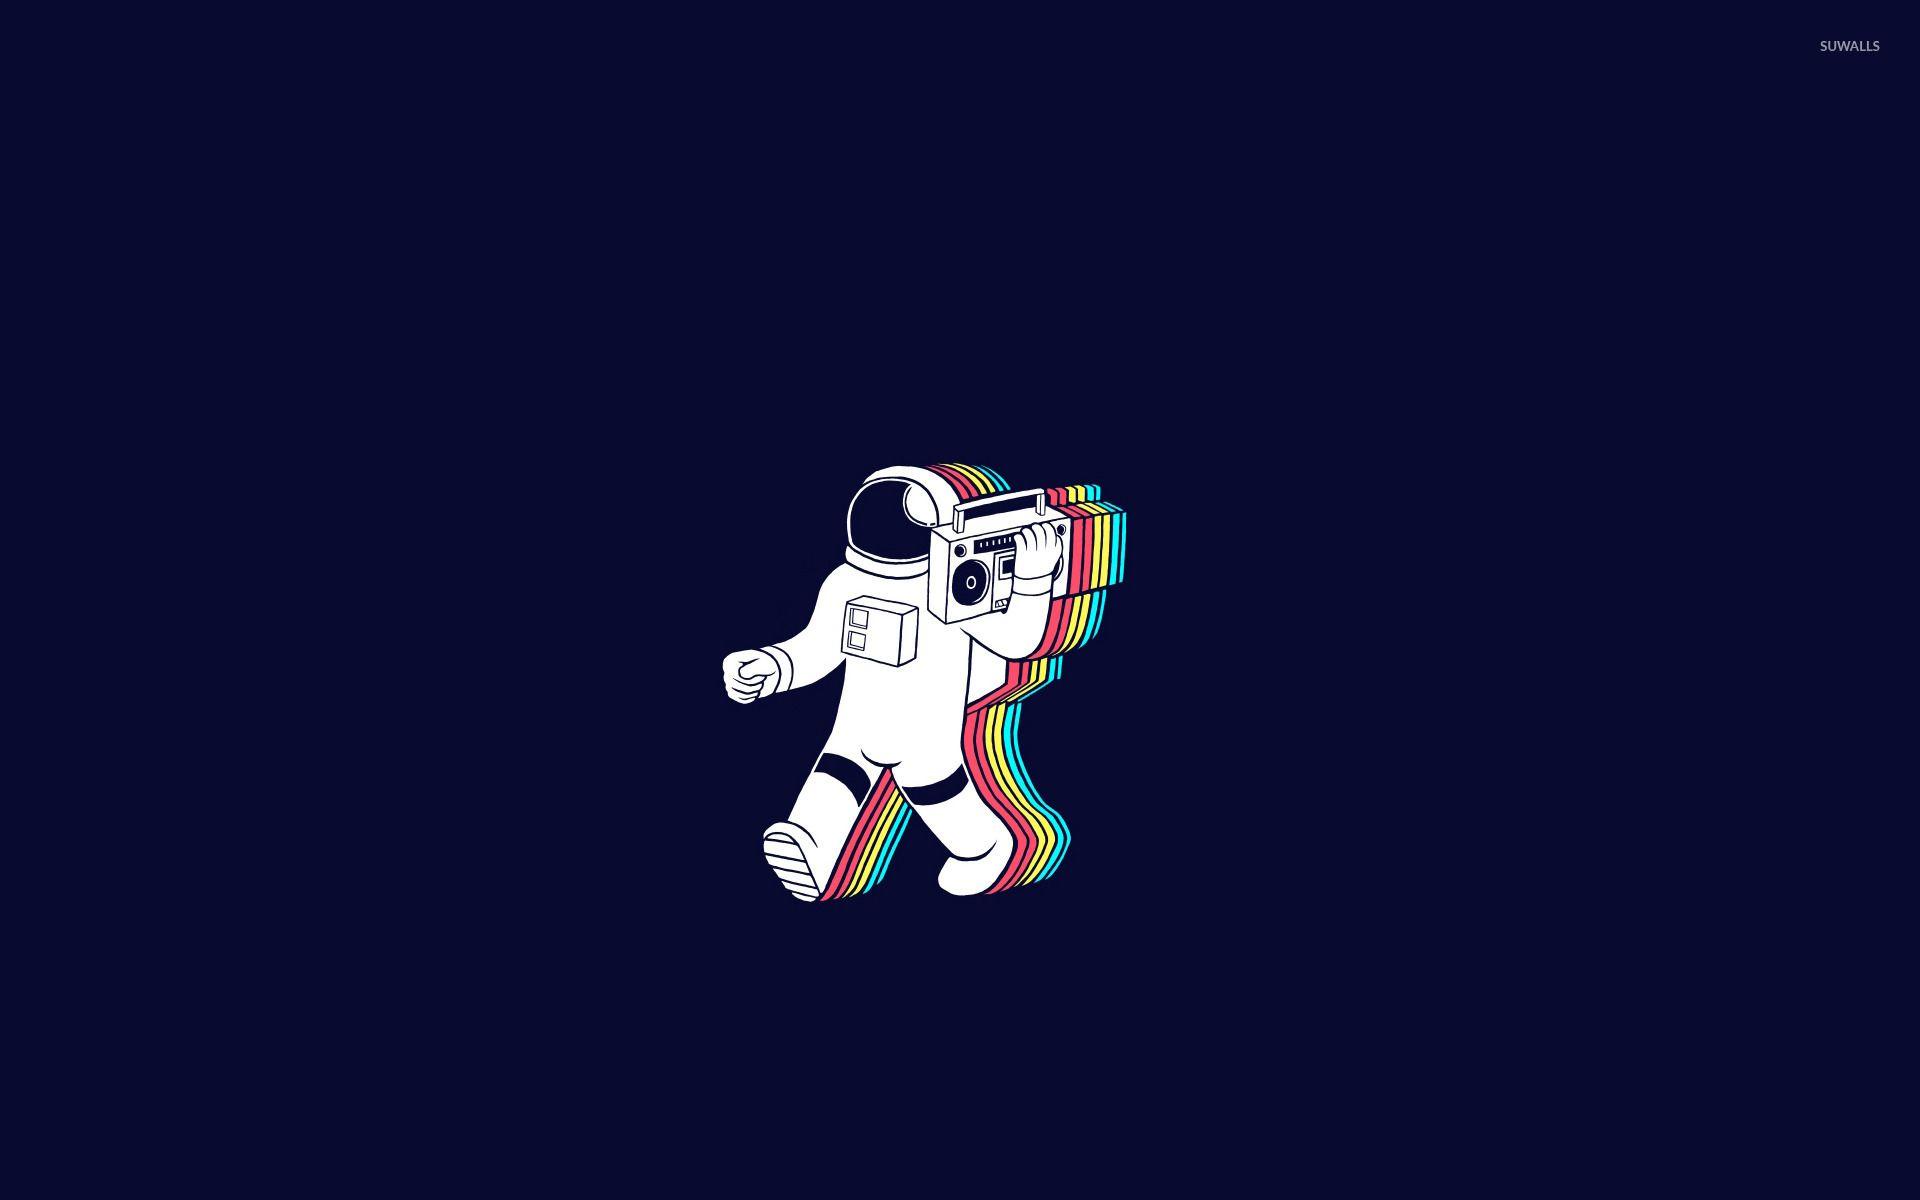 Party Wallpaper HD Background. Astronaut wallpaper, Desktop wallpaper art, Minimalist desktop wallpaper